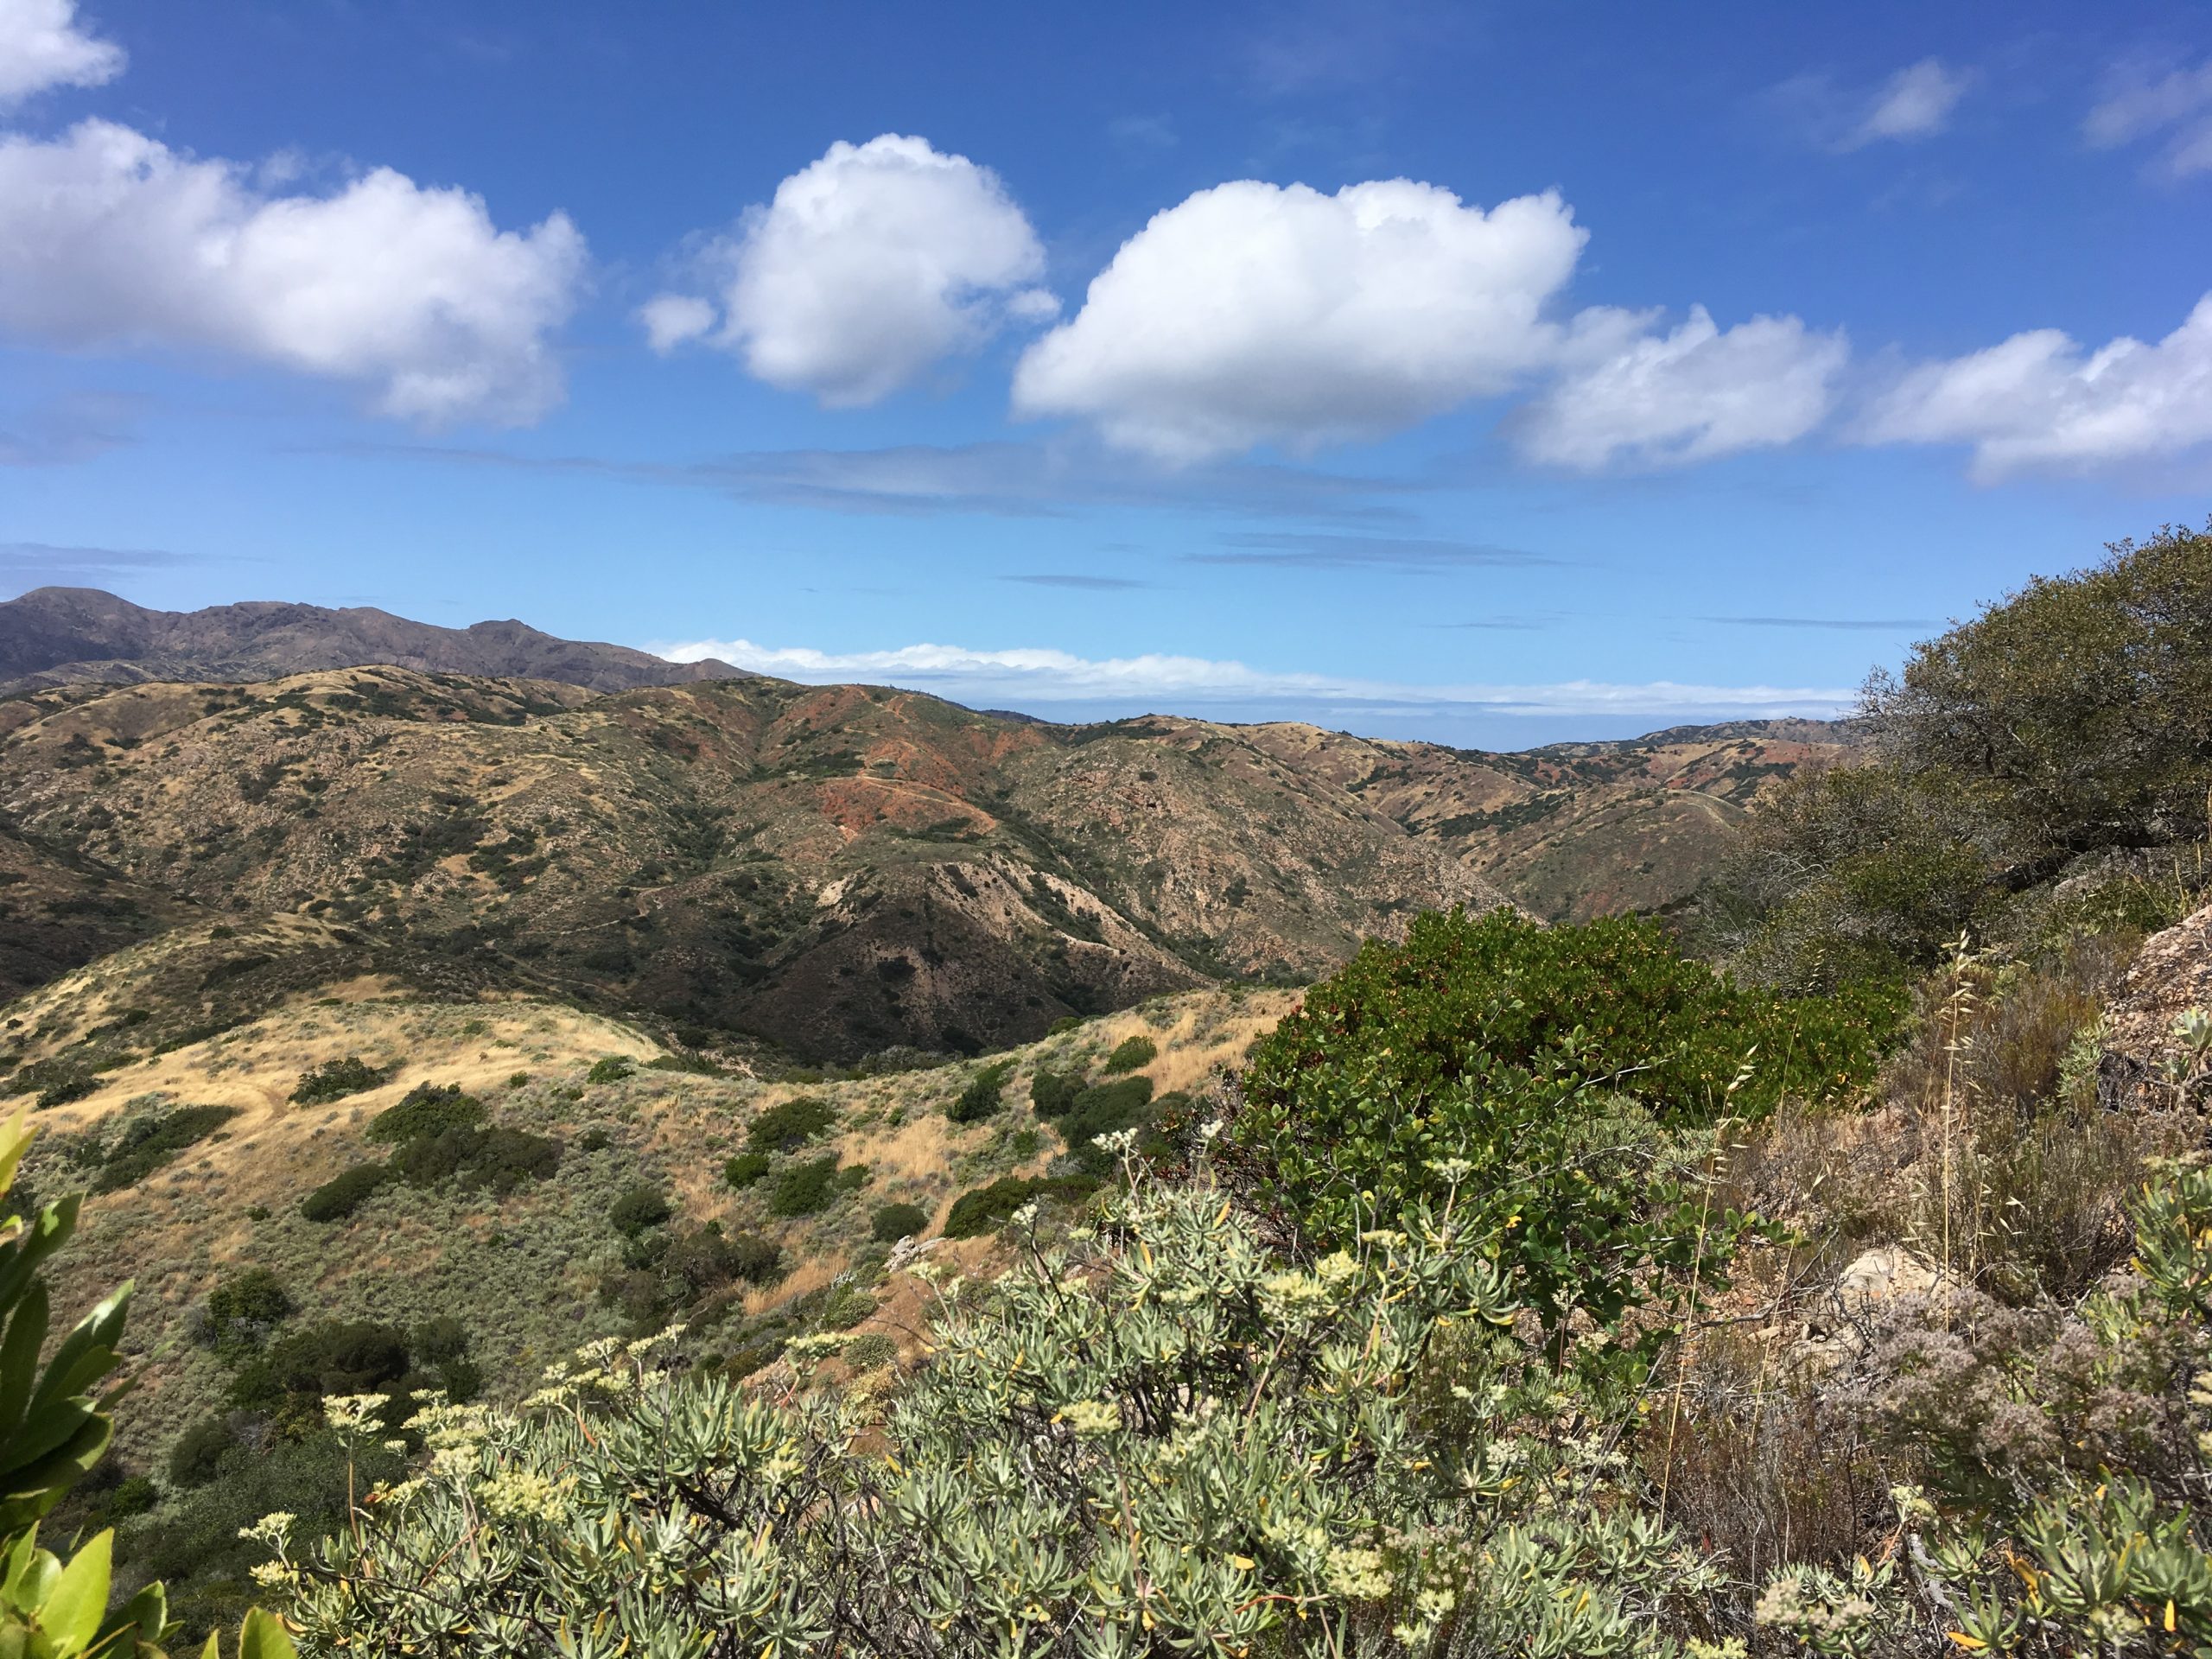 Santa Cruz Island is the largest and most diverse of the Channel Islands, with habitats ranging from coastal terraces to native shrublands to pine forests.